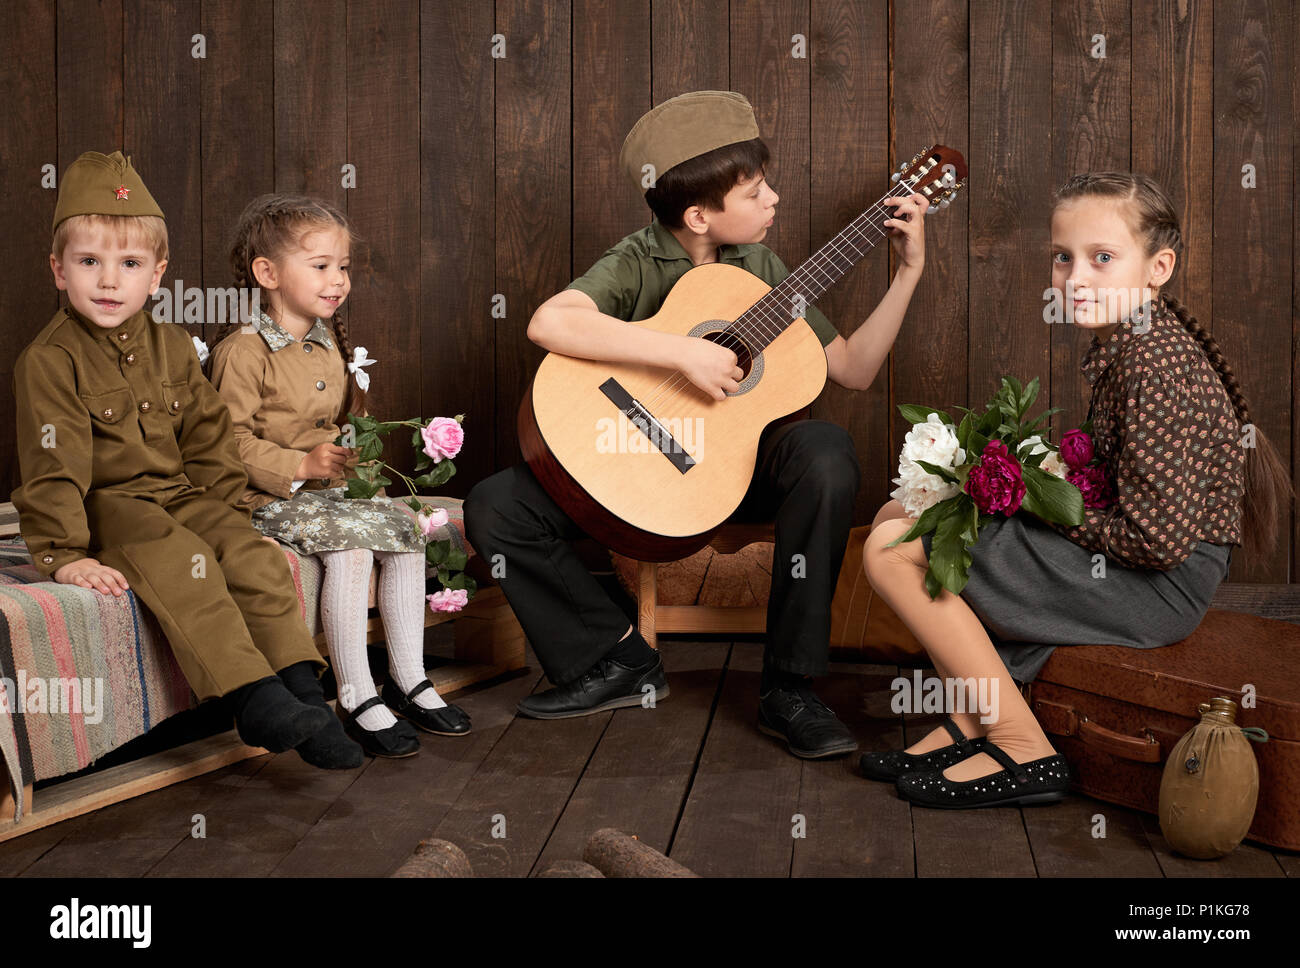 children are dressed in retro military uniforms sitting and playing guitar, sending a soldier to the army, dark wood background, retro style Stock Photo